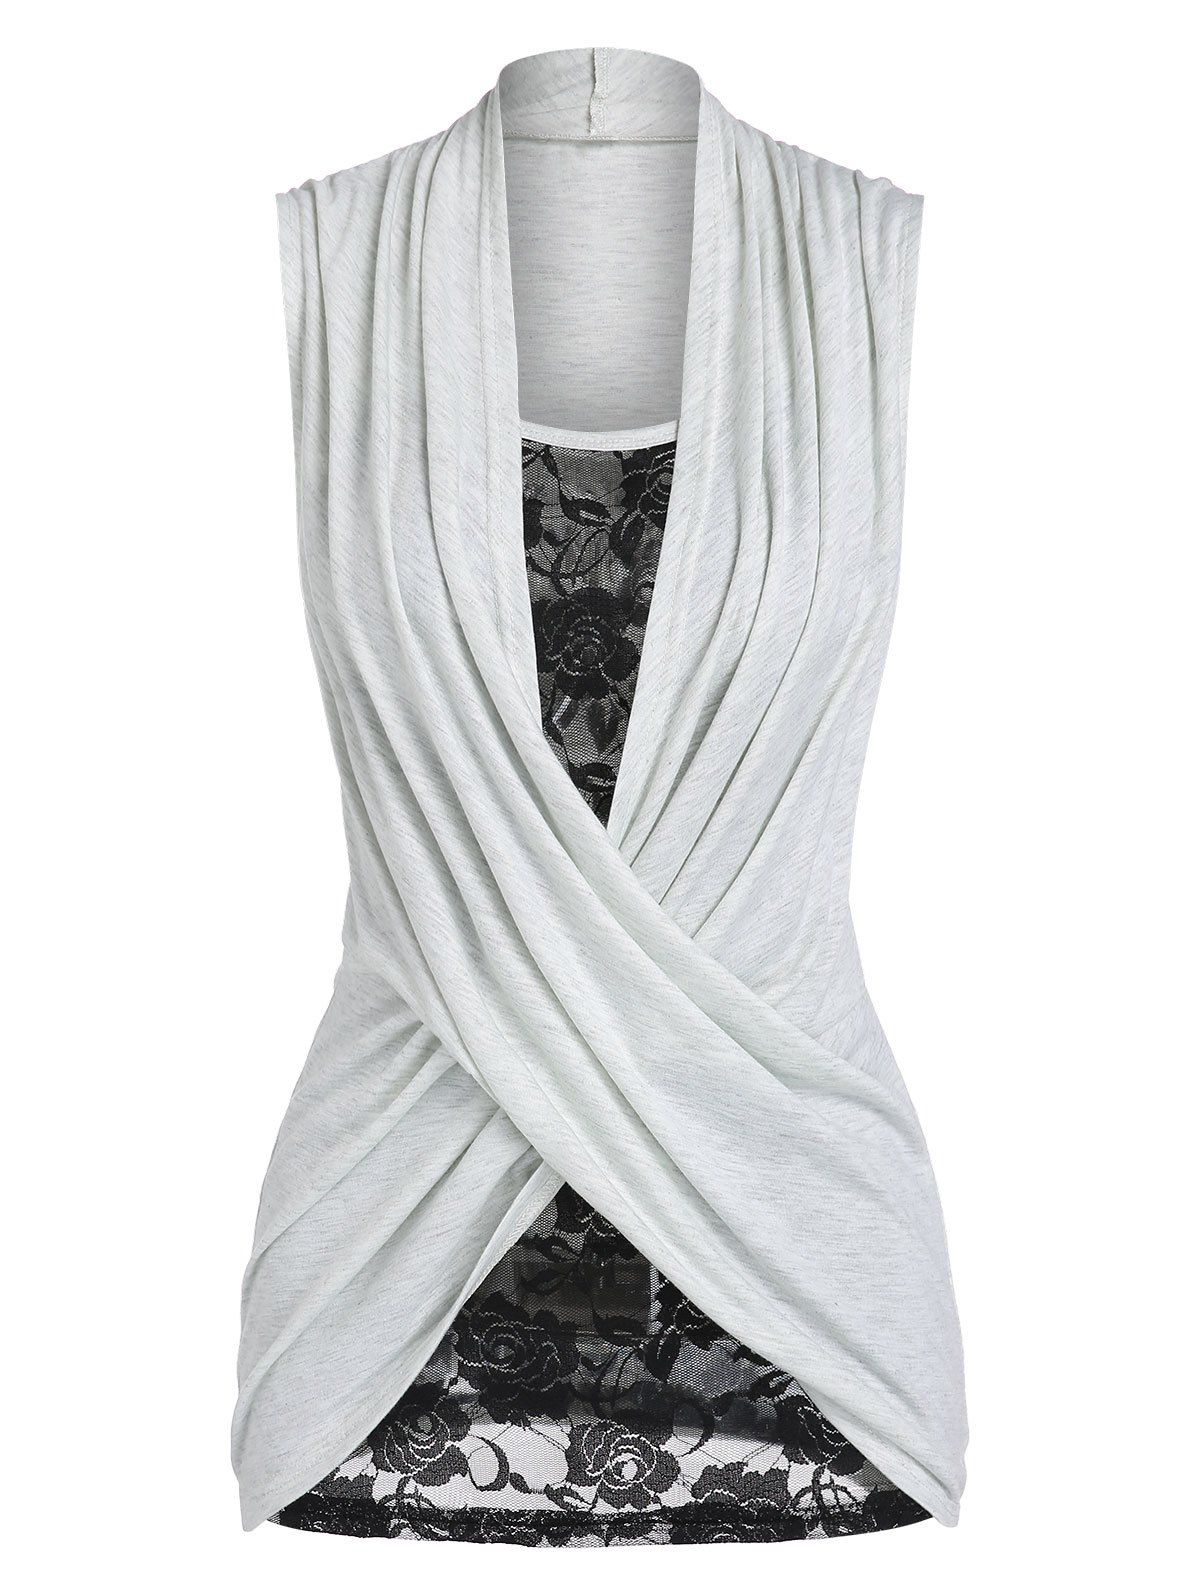 Allover Floral Lace Insert Cami Top and Heather Cross Ruched Tank Top - LIGHT GRAY XL